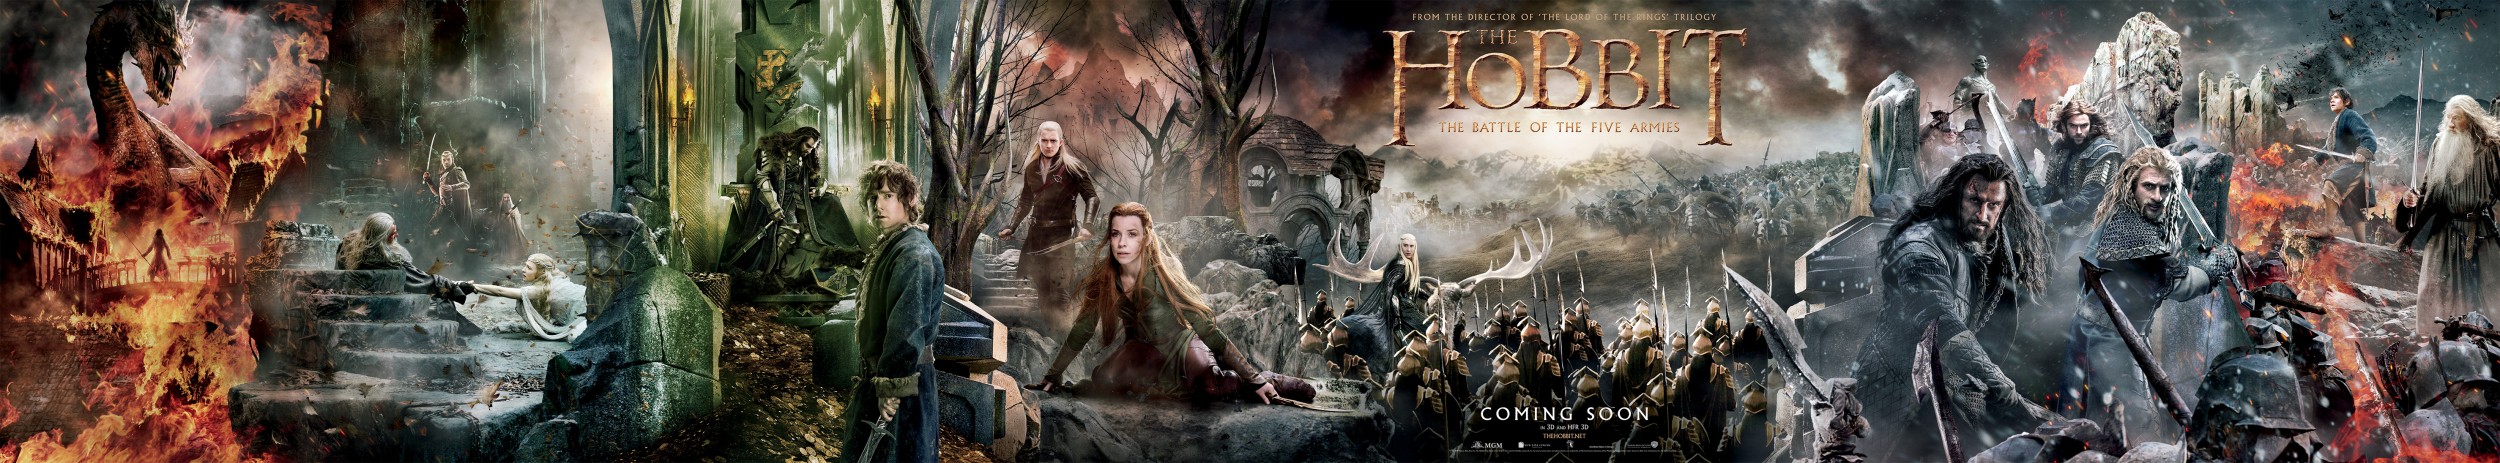 Extra Large Movie Poster Image for The Hobbit: The Battle of the Five Armies (#3 of 28)